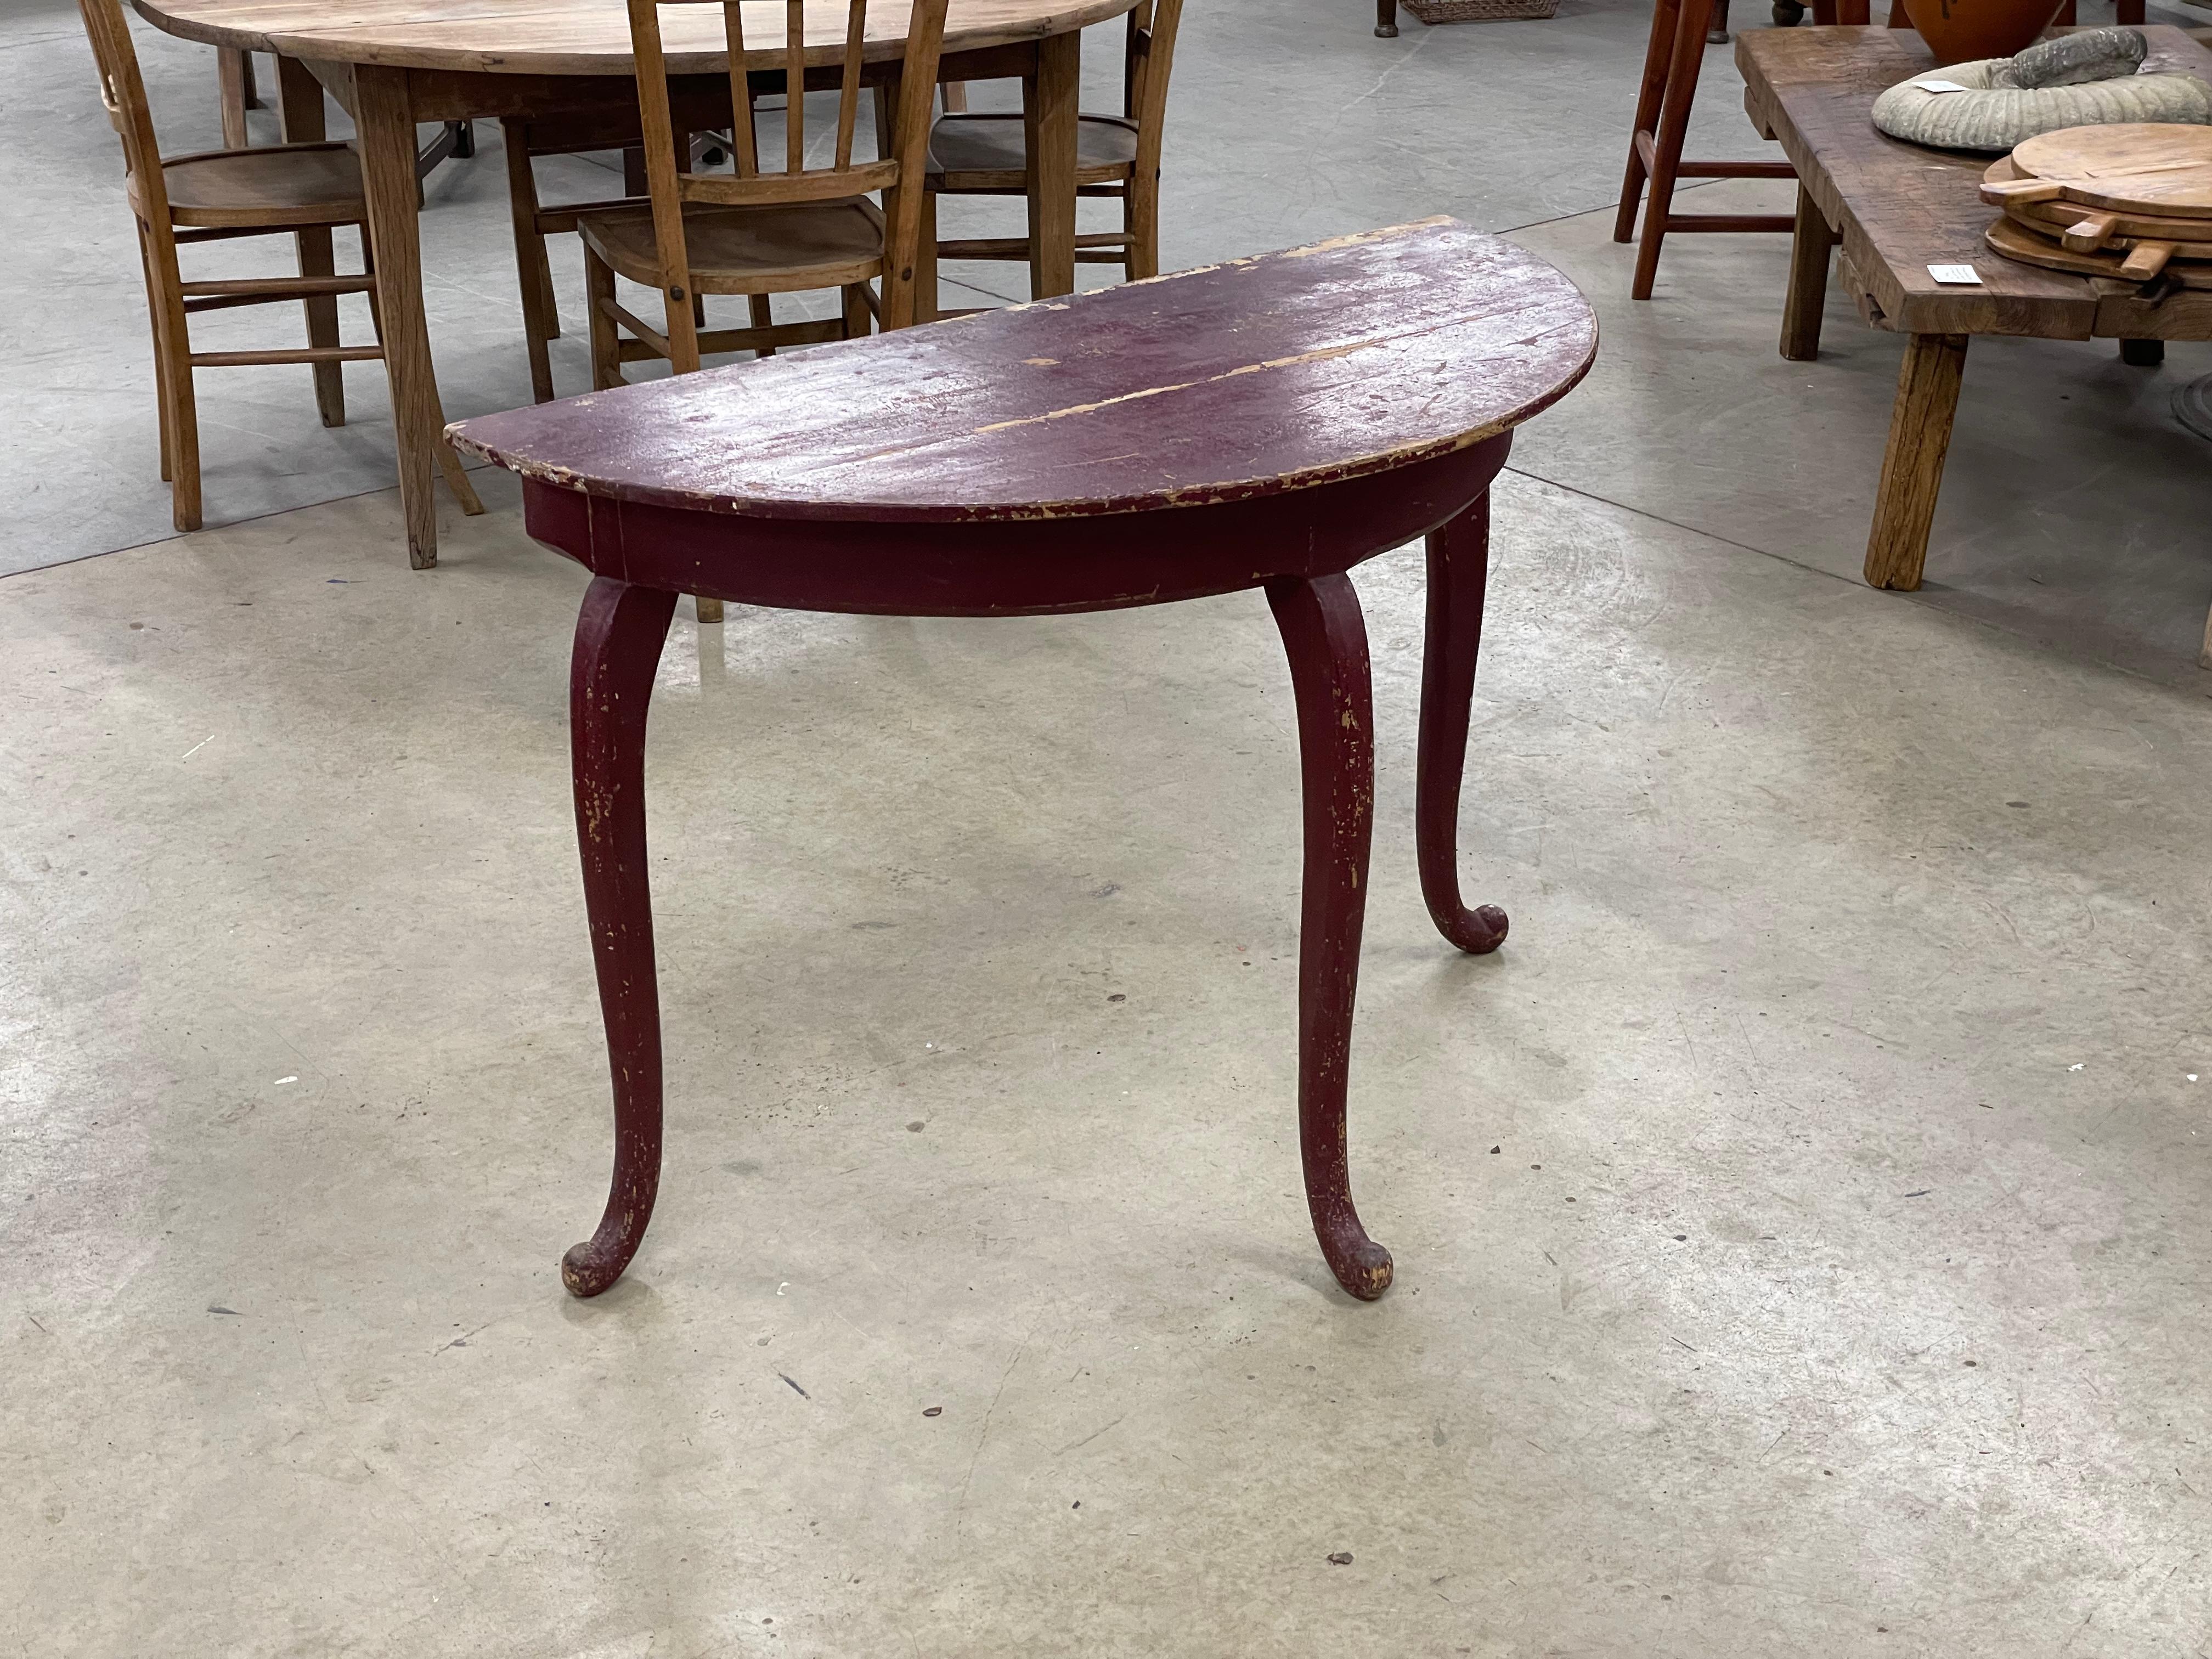 Antique Swedish demi-lune console table. The half moon table top is supported on cabriole legs. The original red paint along with its simplistic design is a perfect addition to Swedish Scandi farmhouse style.